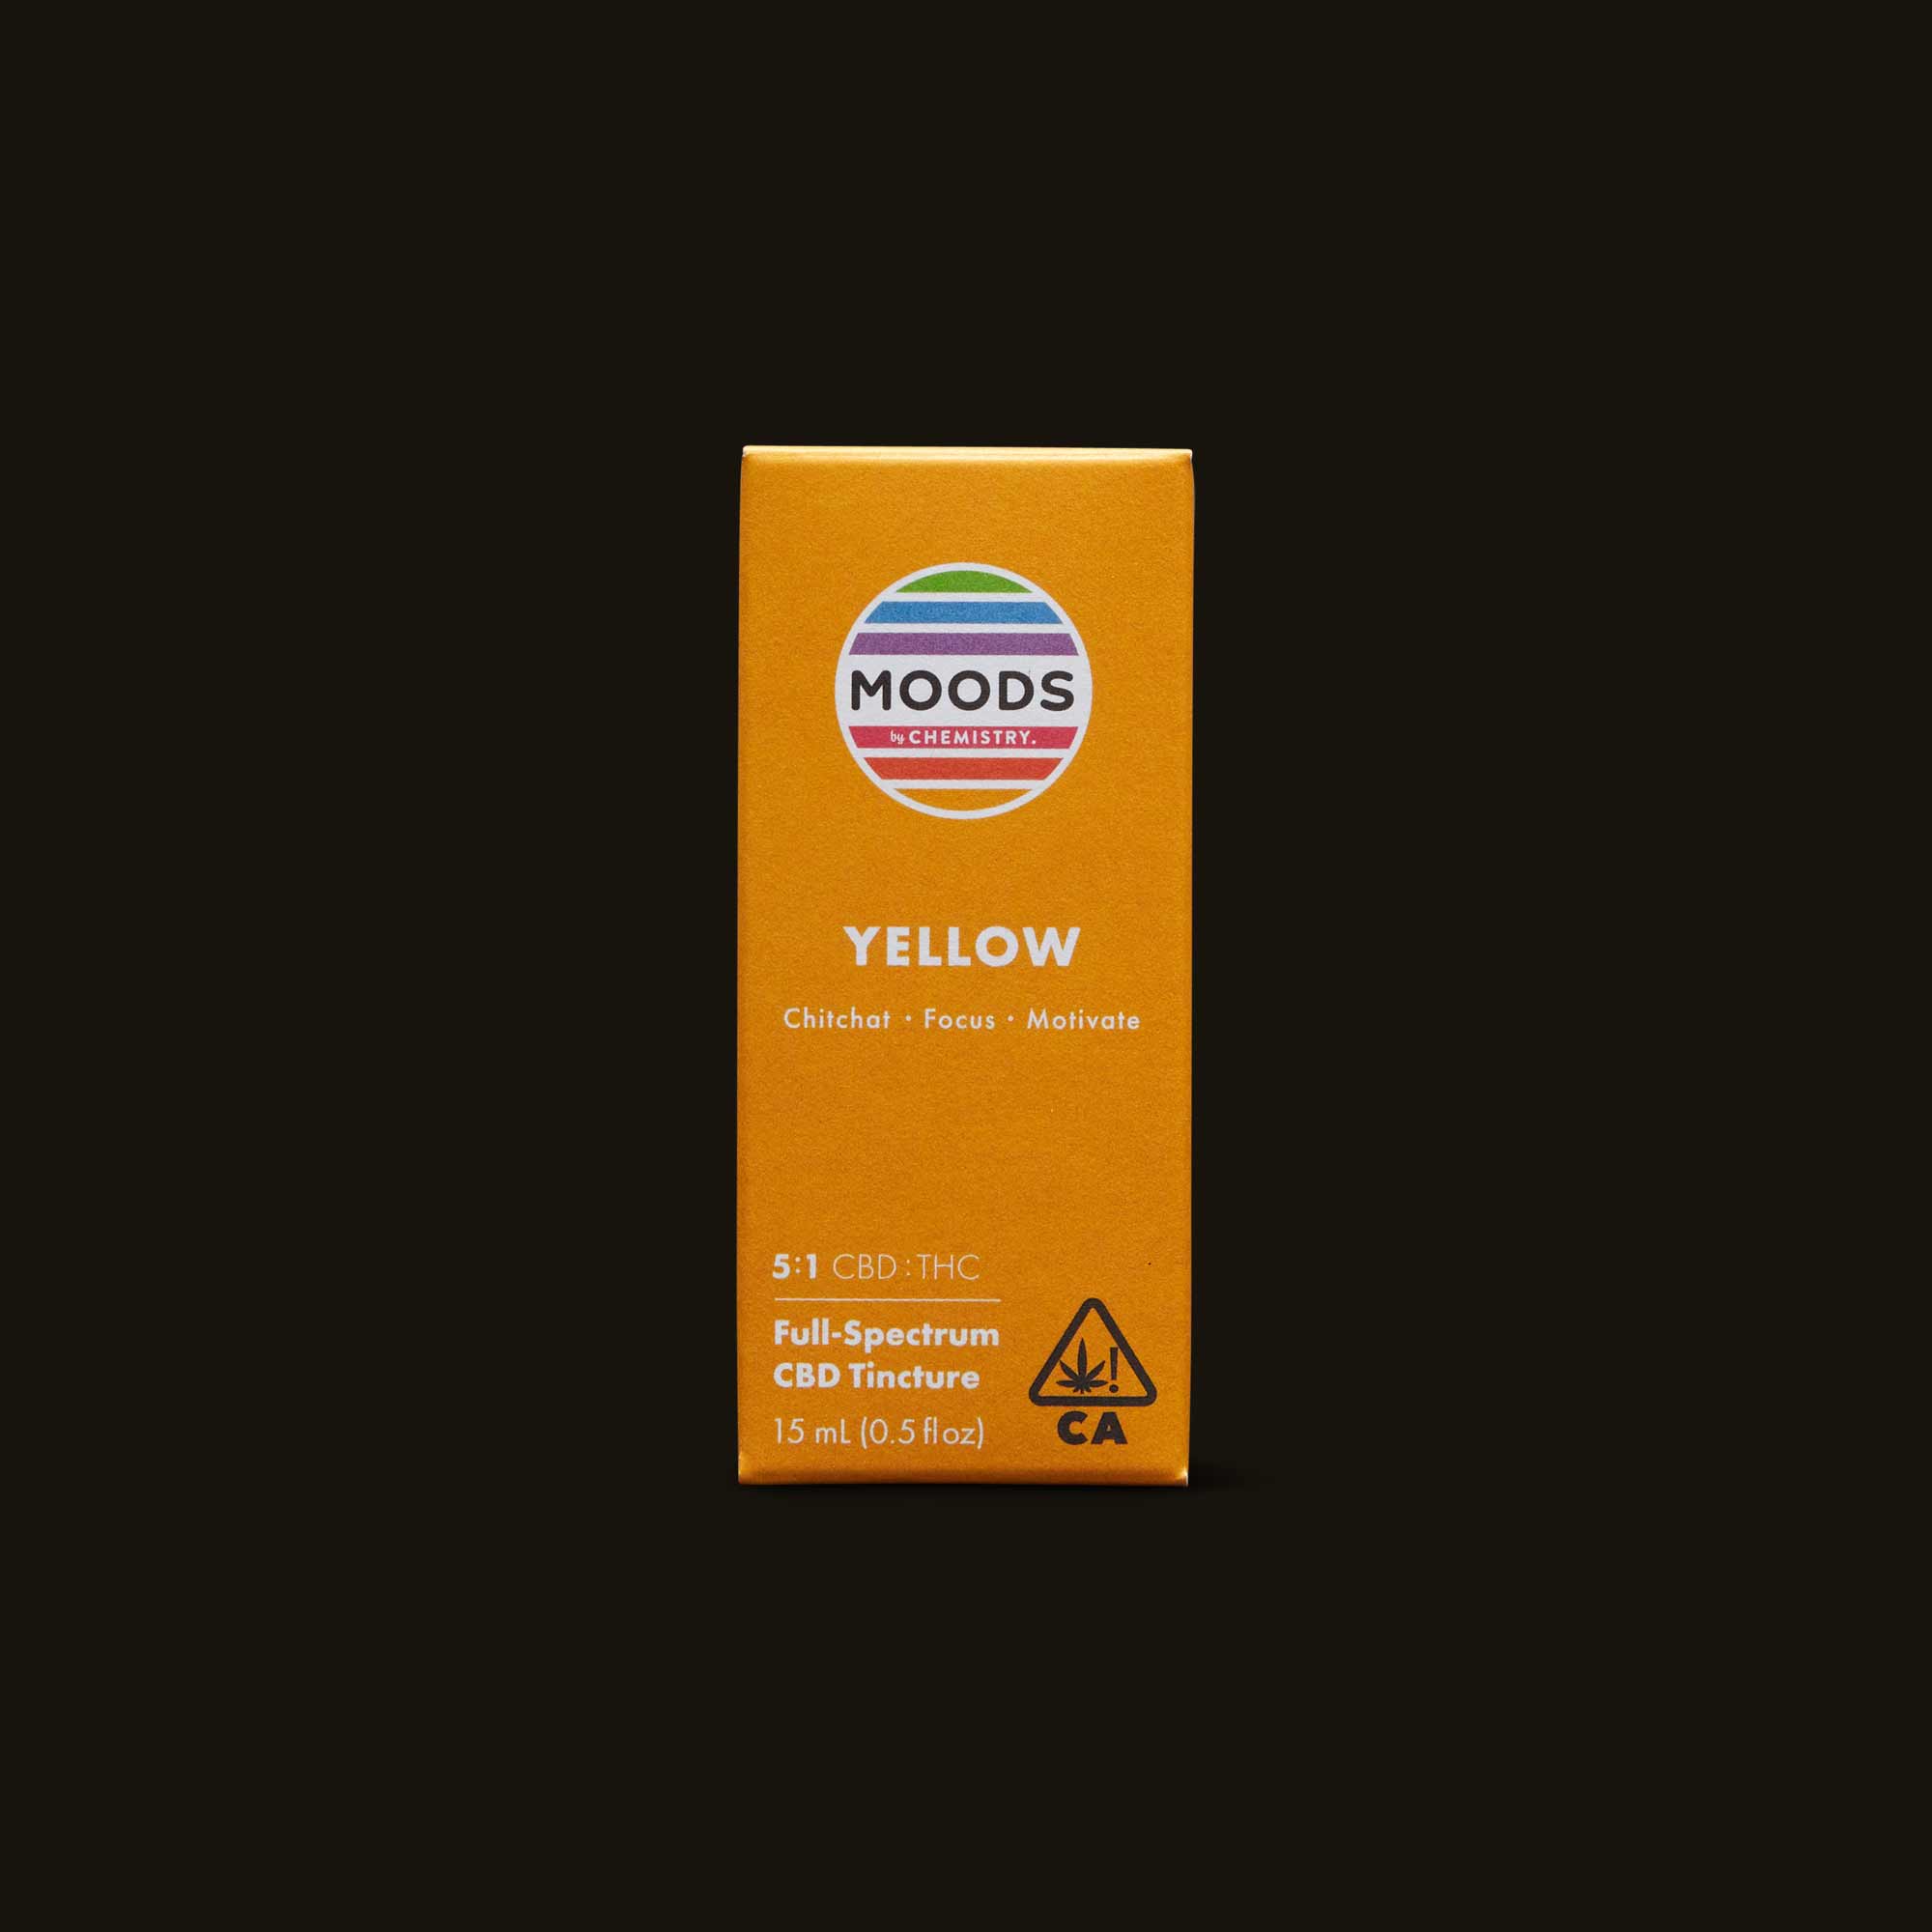 Chemisty-Yellow-Moods-Tincture-Front-CA-1794-796508